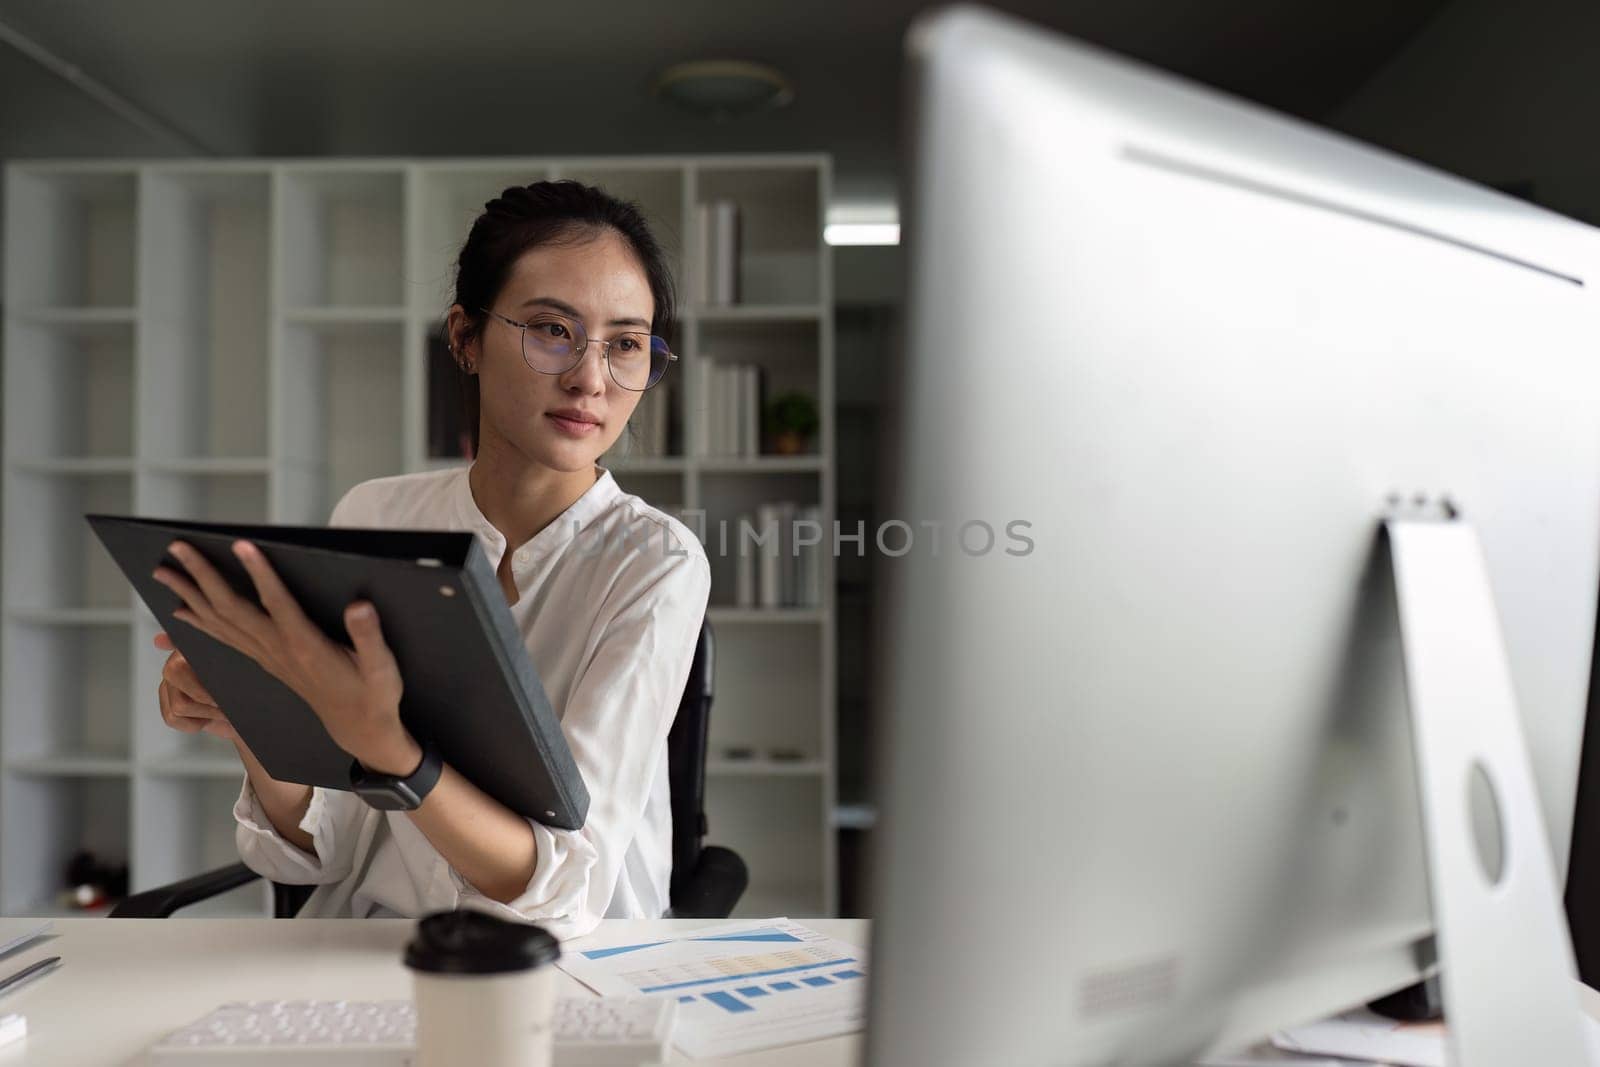 A woman is sitting at a desk with a computer monitor in front of her. She is holding a folder in her hand and she is focused on the task at hand. Concept of productivity and concentration